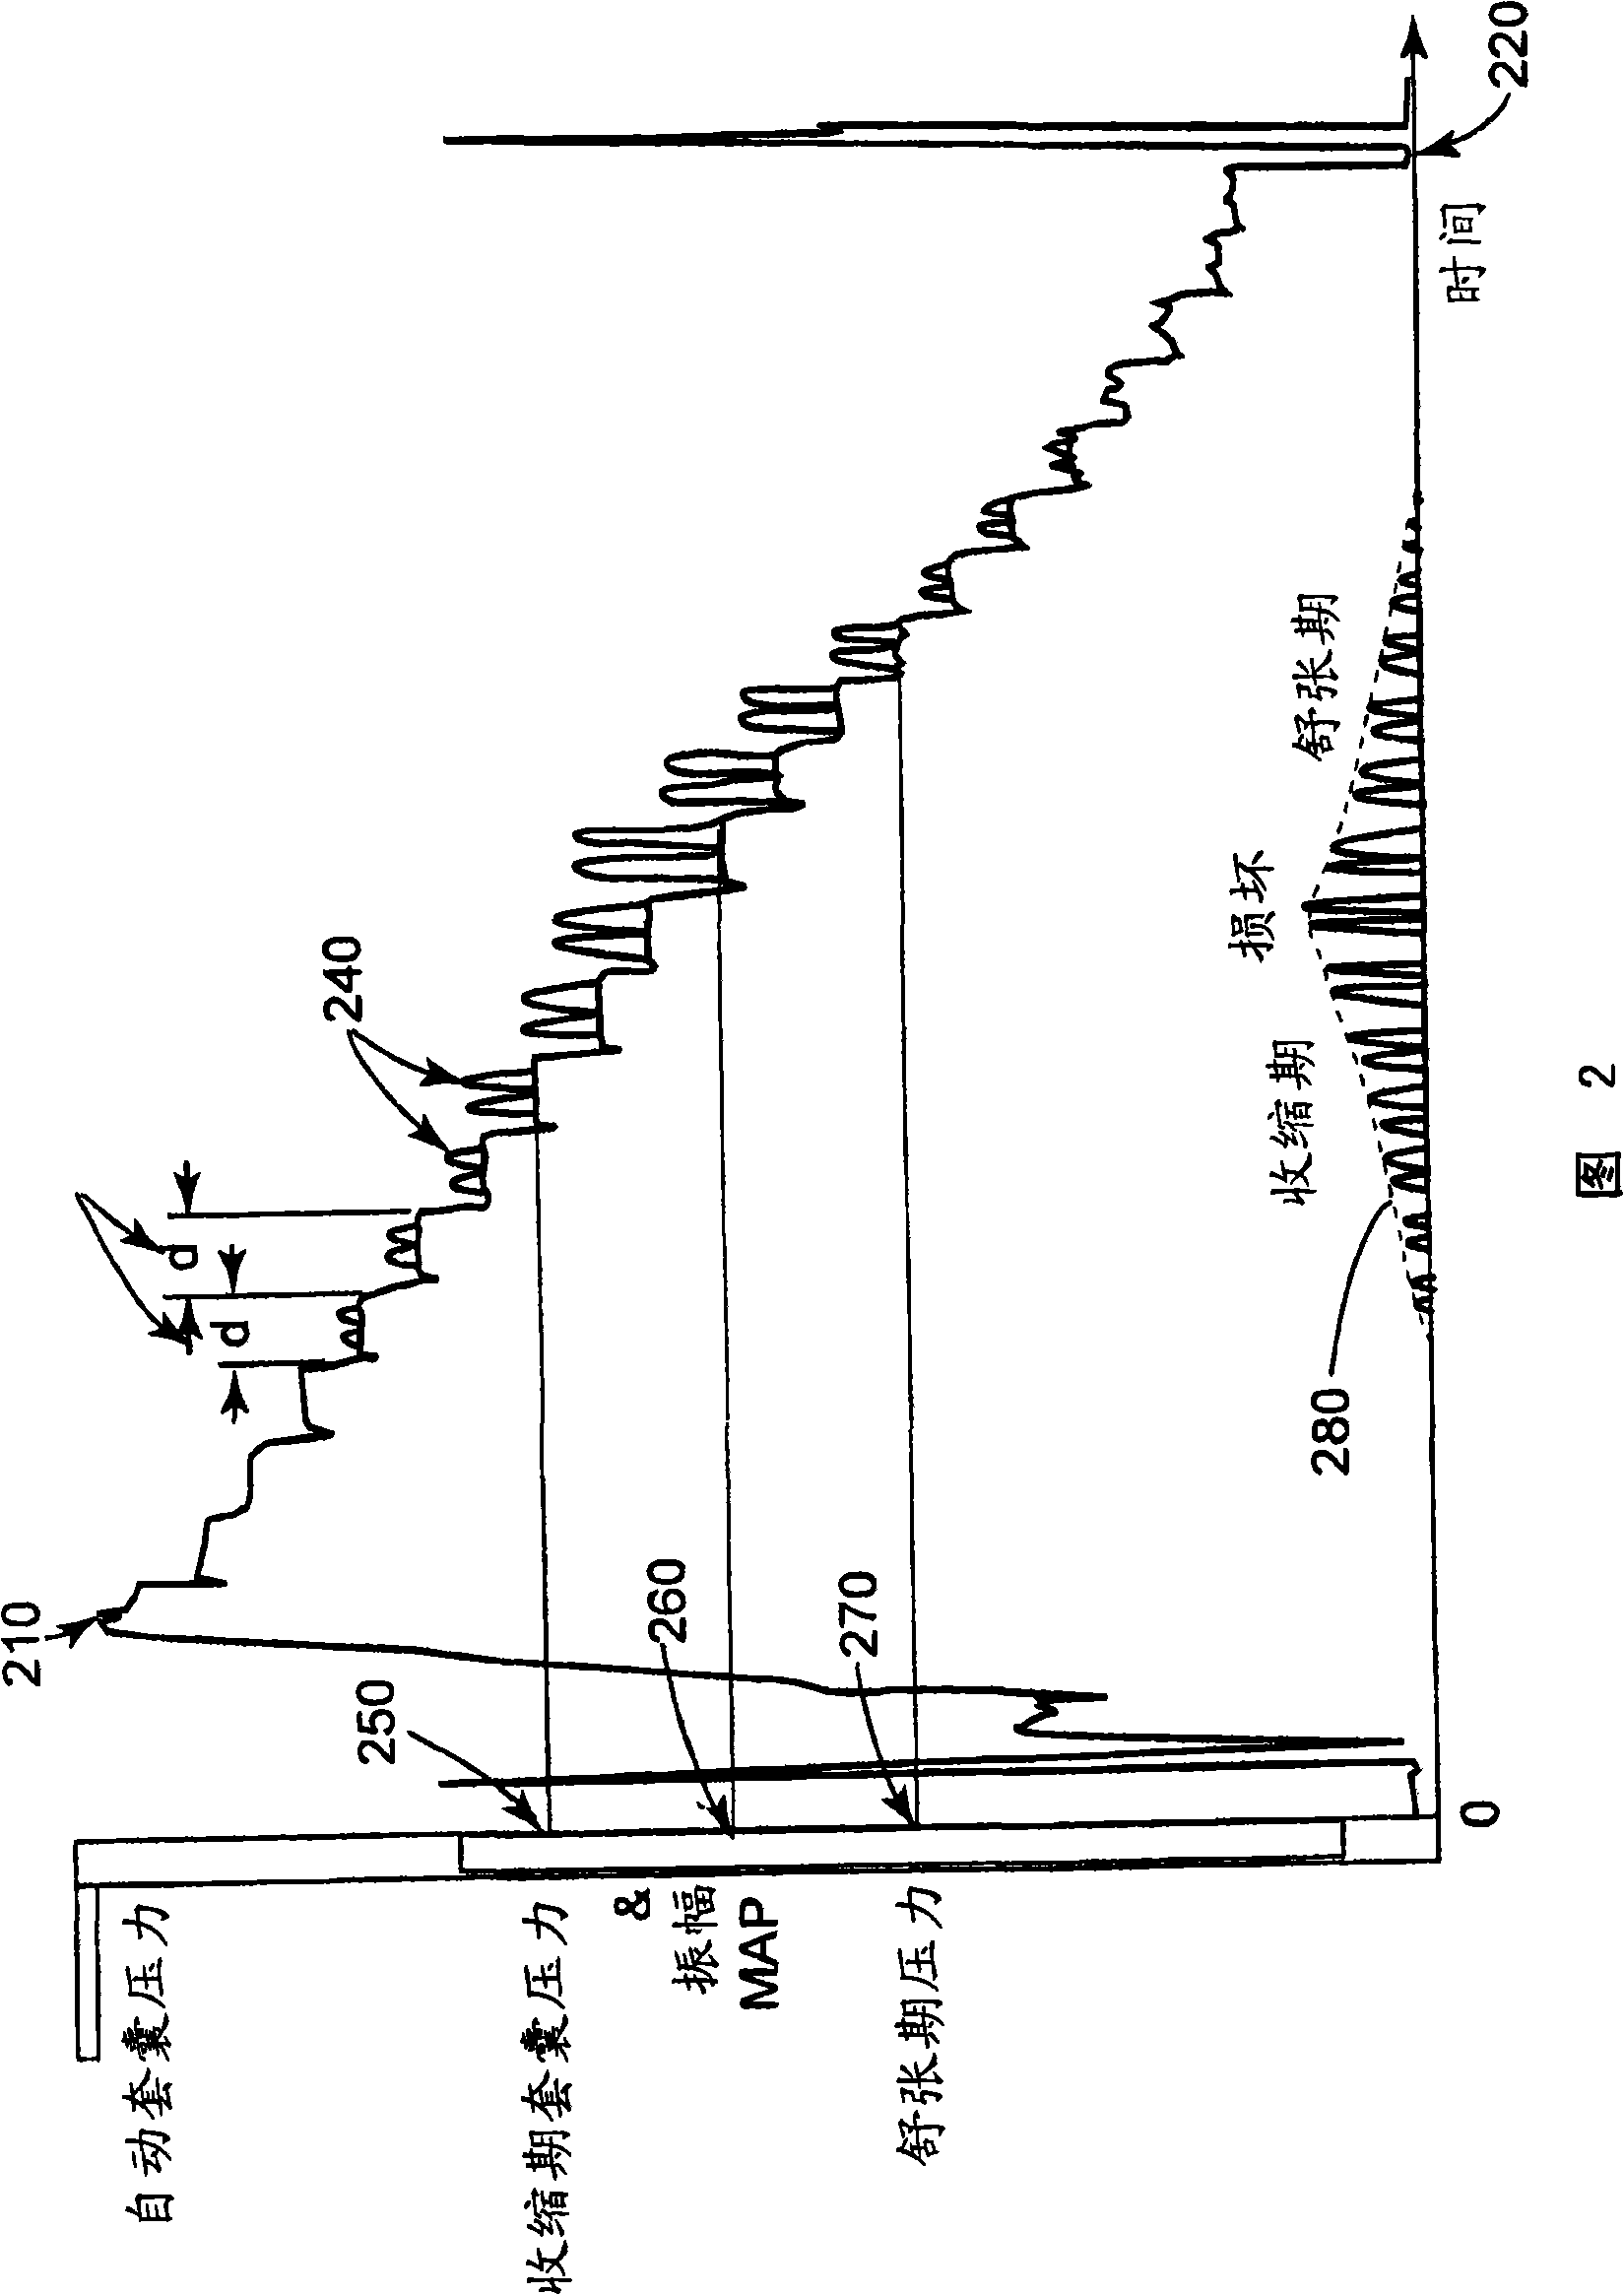 Method of controlling inflation of a cuff in blood pressure determination